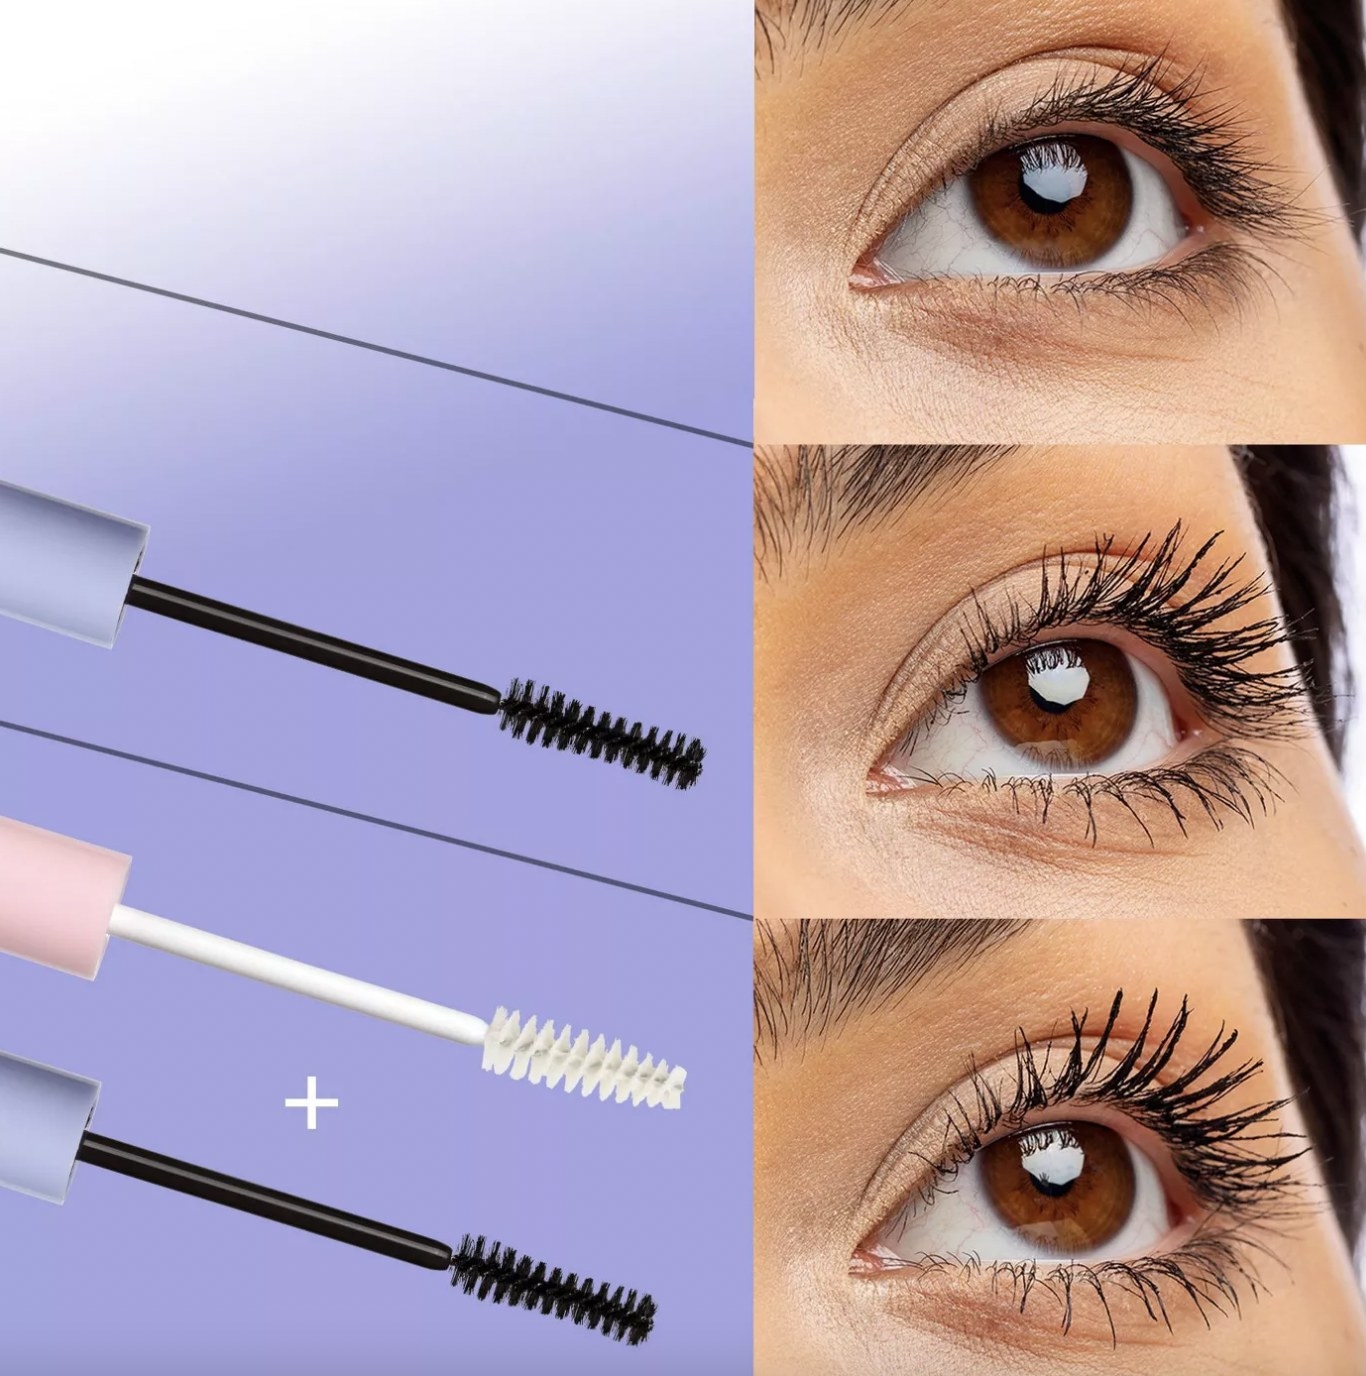 A trio of images that shows eyelashes before and after using a primer and mascara